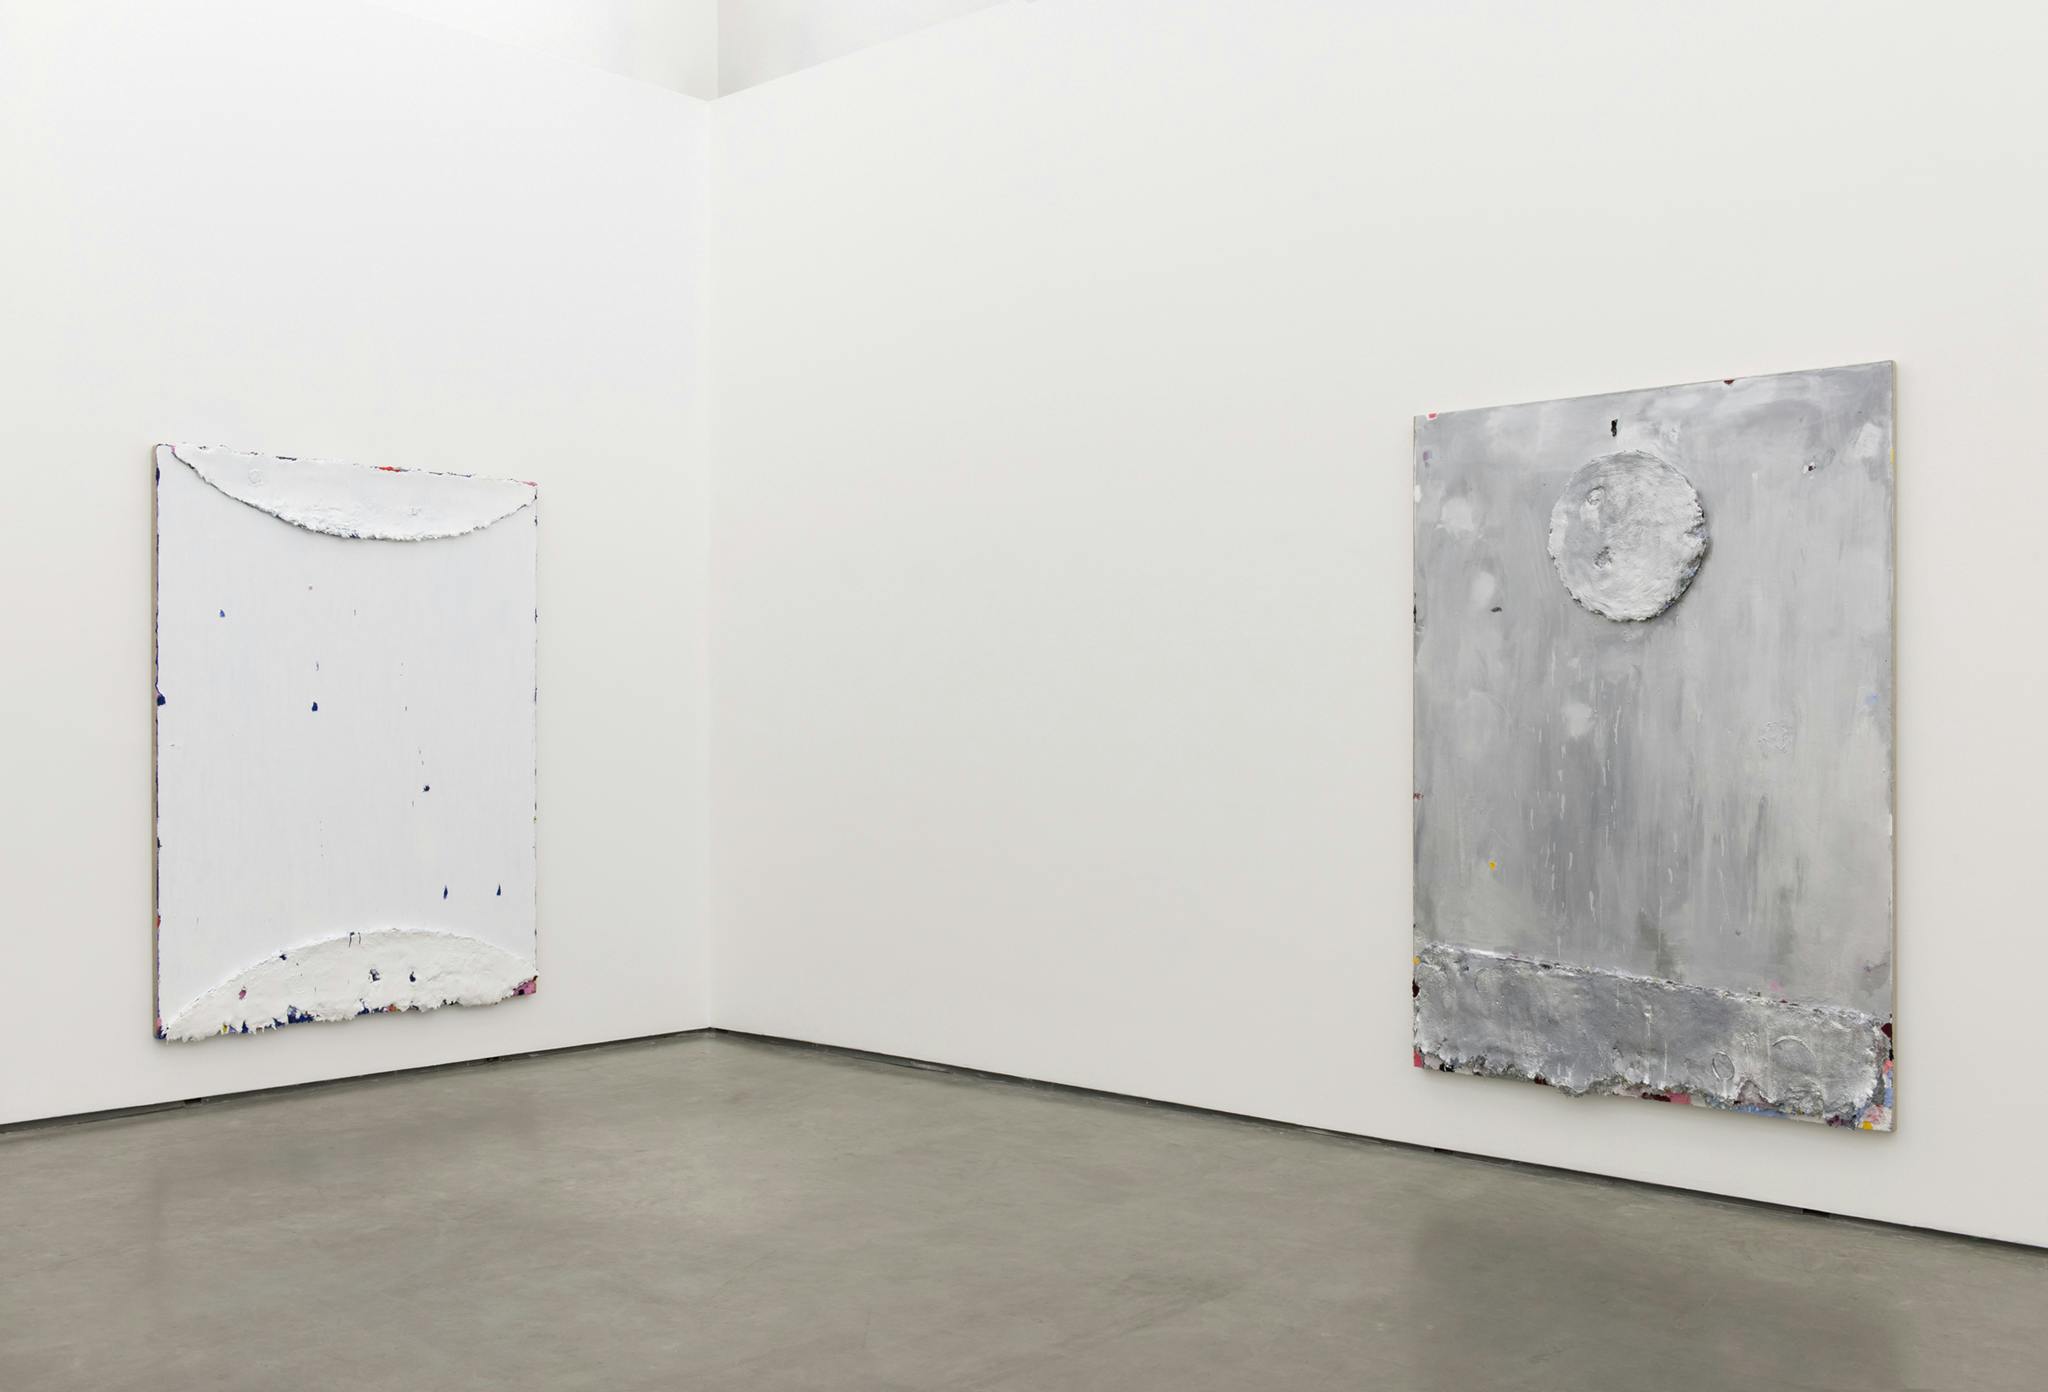 Two large-scale paintings hang on the ether side of a corner wall of a gallery space. The paintings appear sculptural, through the process of repeated layering and manipulating of the paint. 